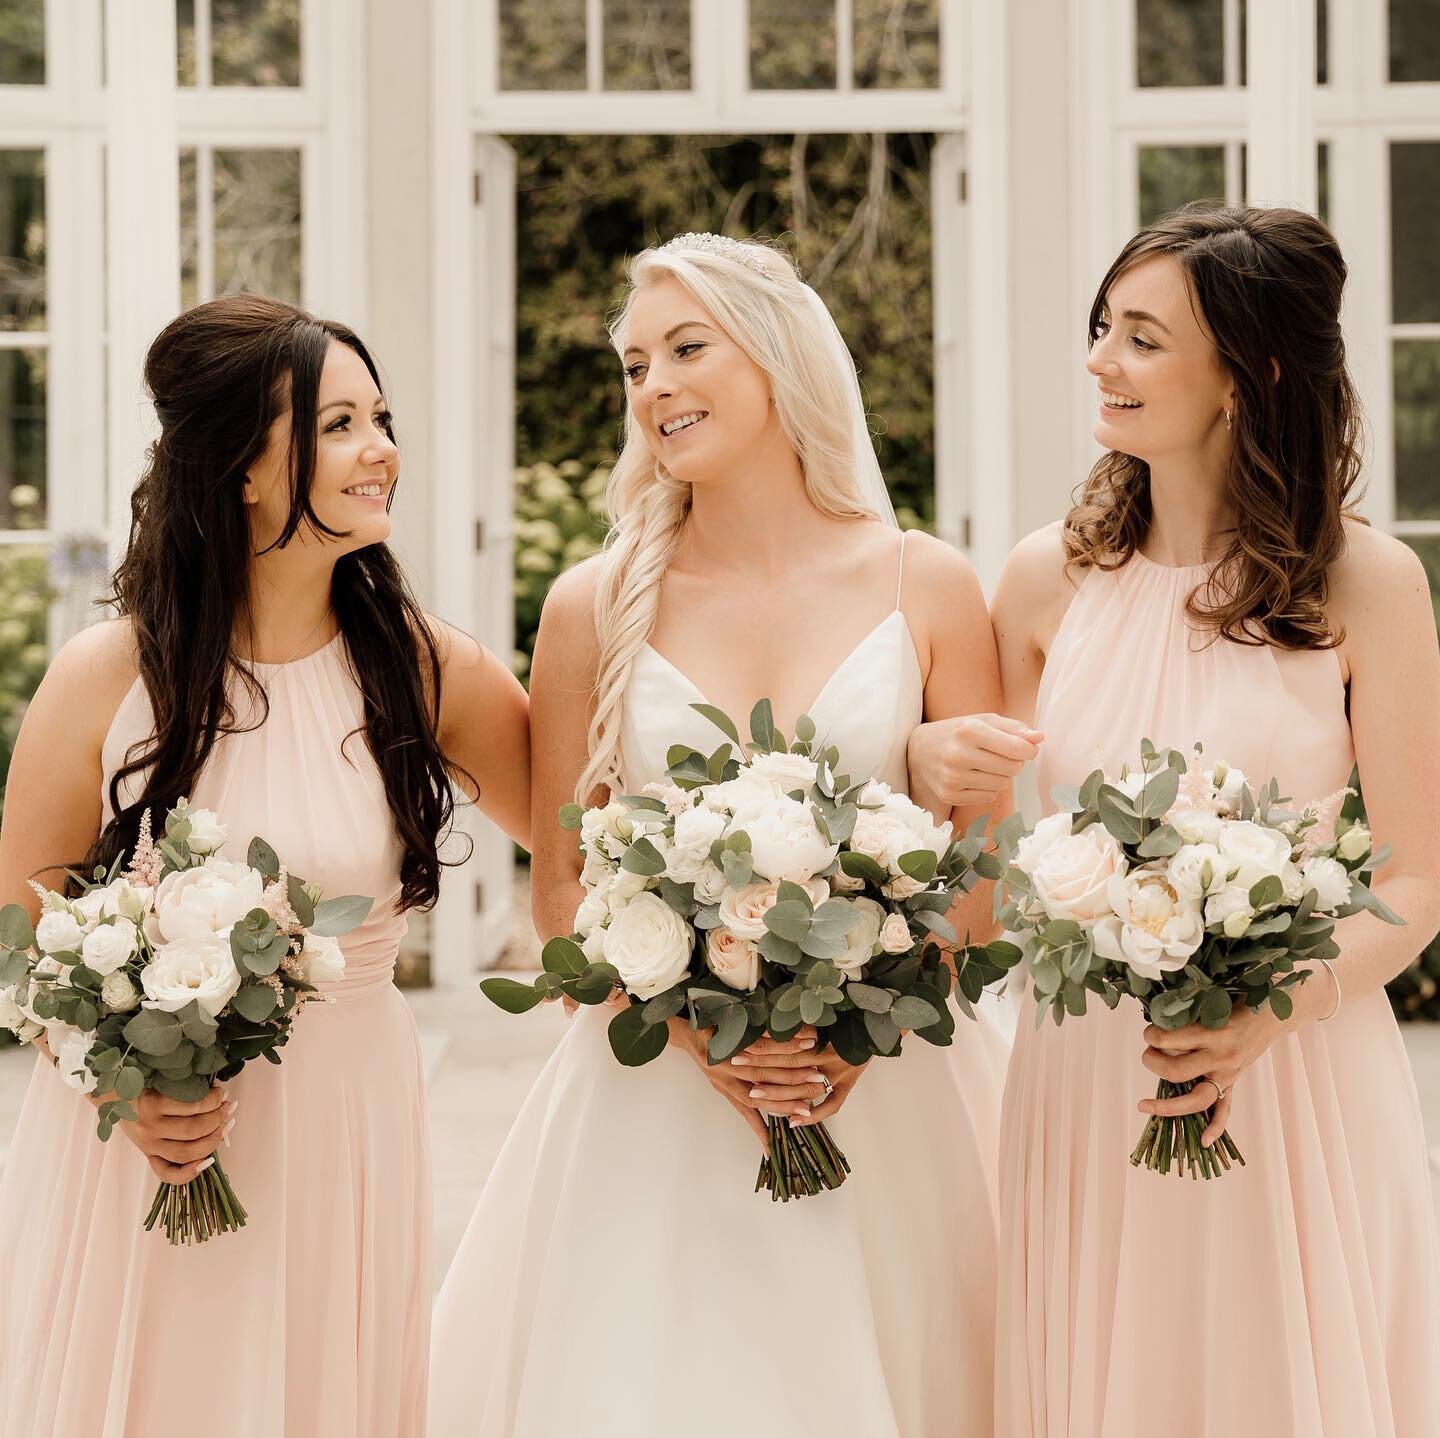 Girls club right here! Always love a happy little tribe of gal pals on a wedding and these girls brought the fun for sure. Such a classic shot that you just know will be treasured for years. Plus you must know me by now that I lurve the neutrals! Mor